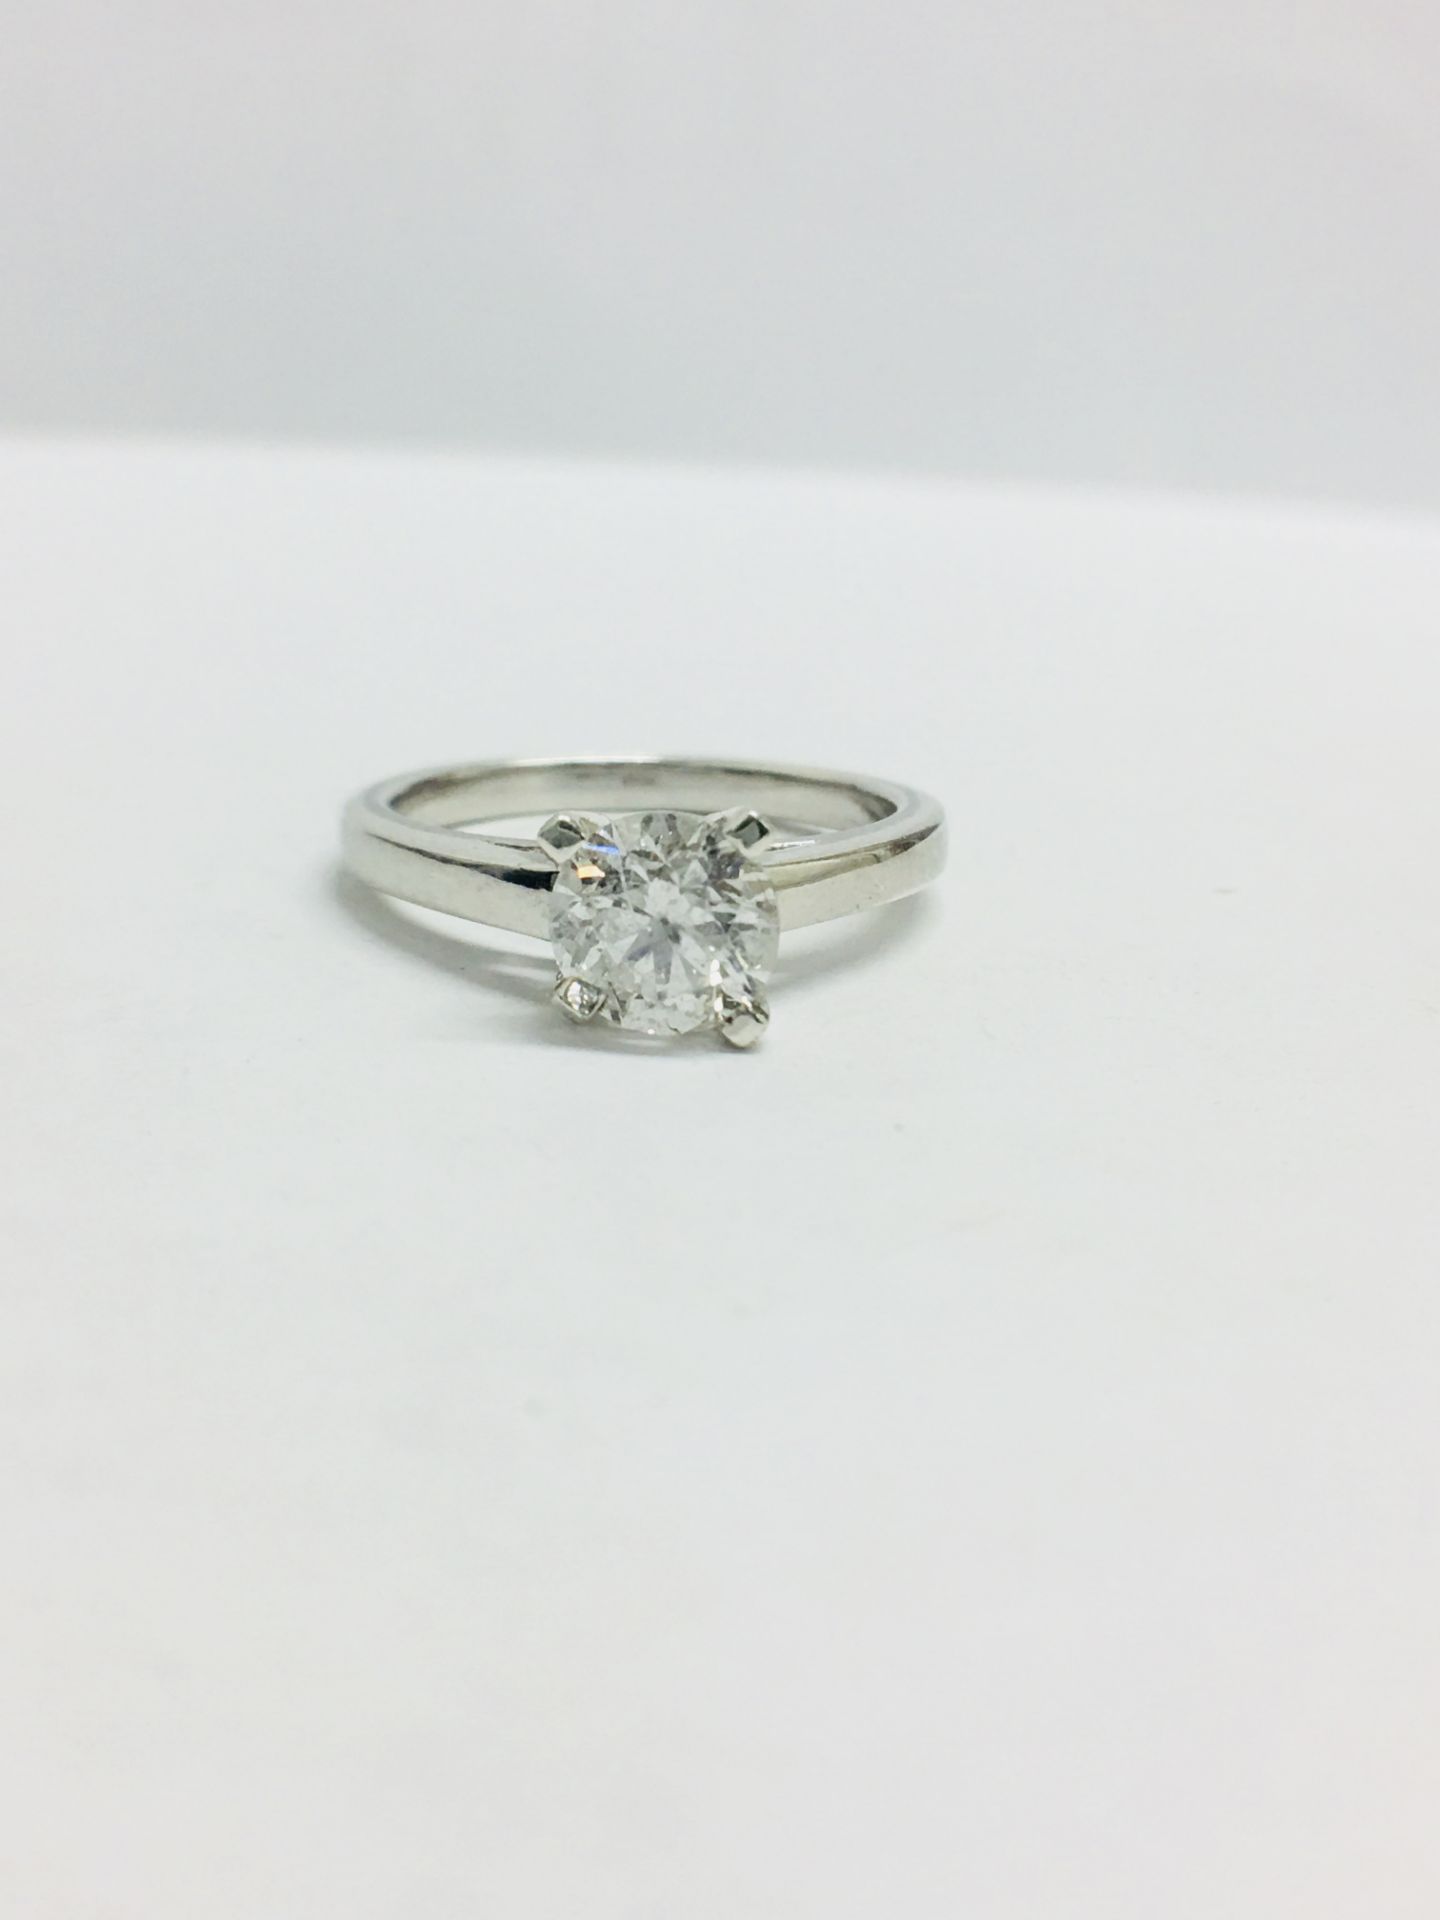 1.05ct diamond solitaire ring with a brilliant cut diamond. H colour and si3 clarity. Set in 18ct